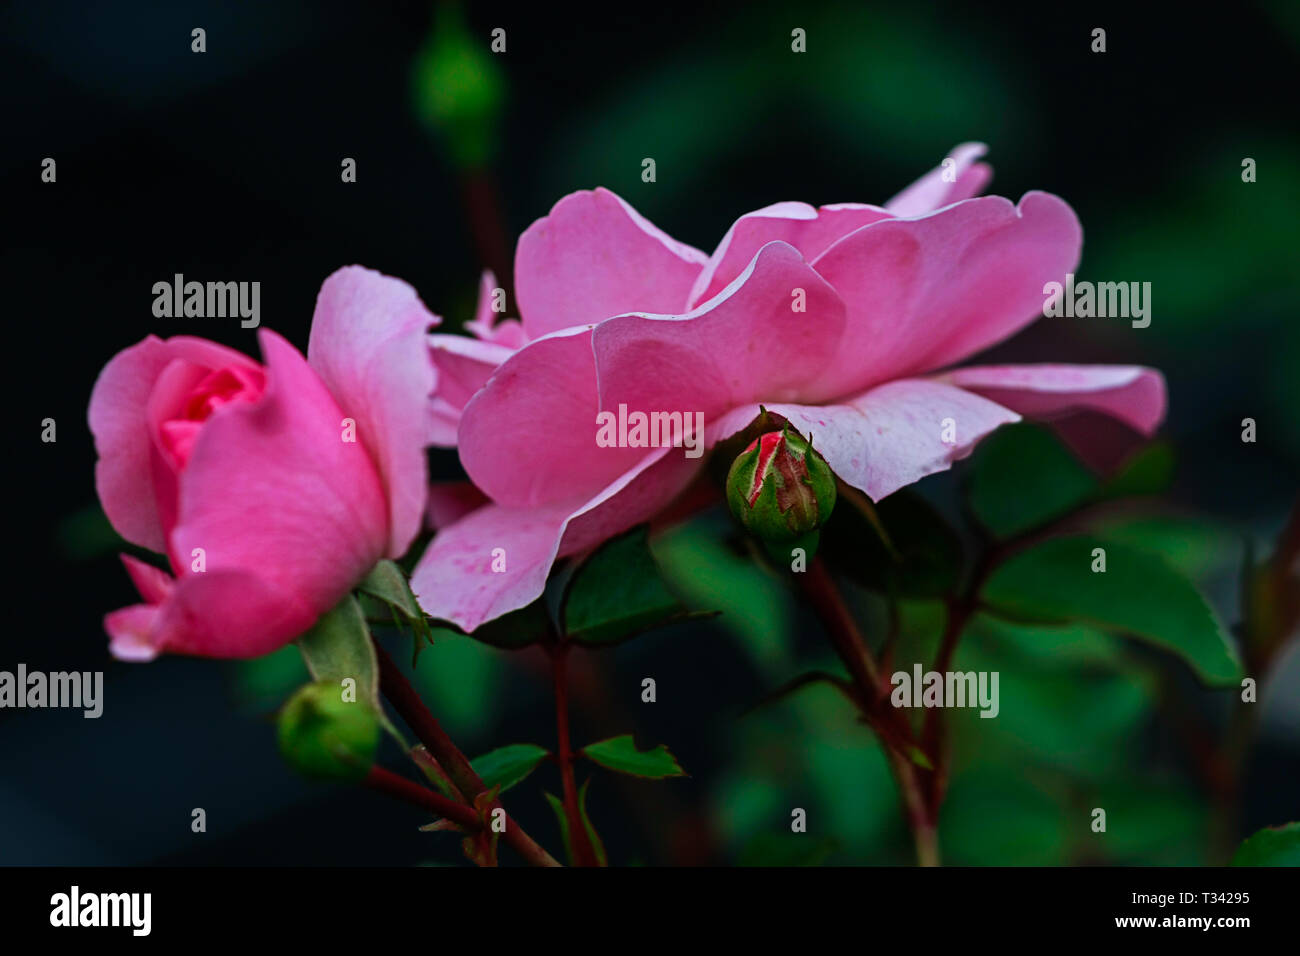 pink rose petals in front of green blurry background Stock Photo